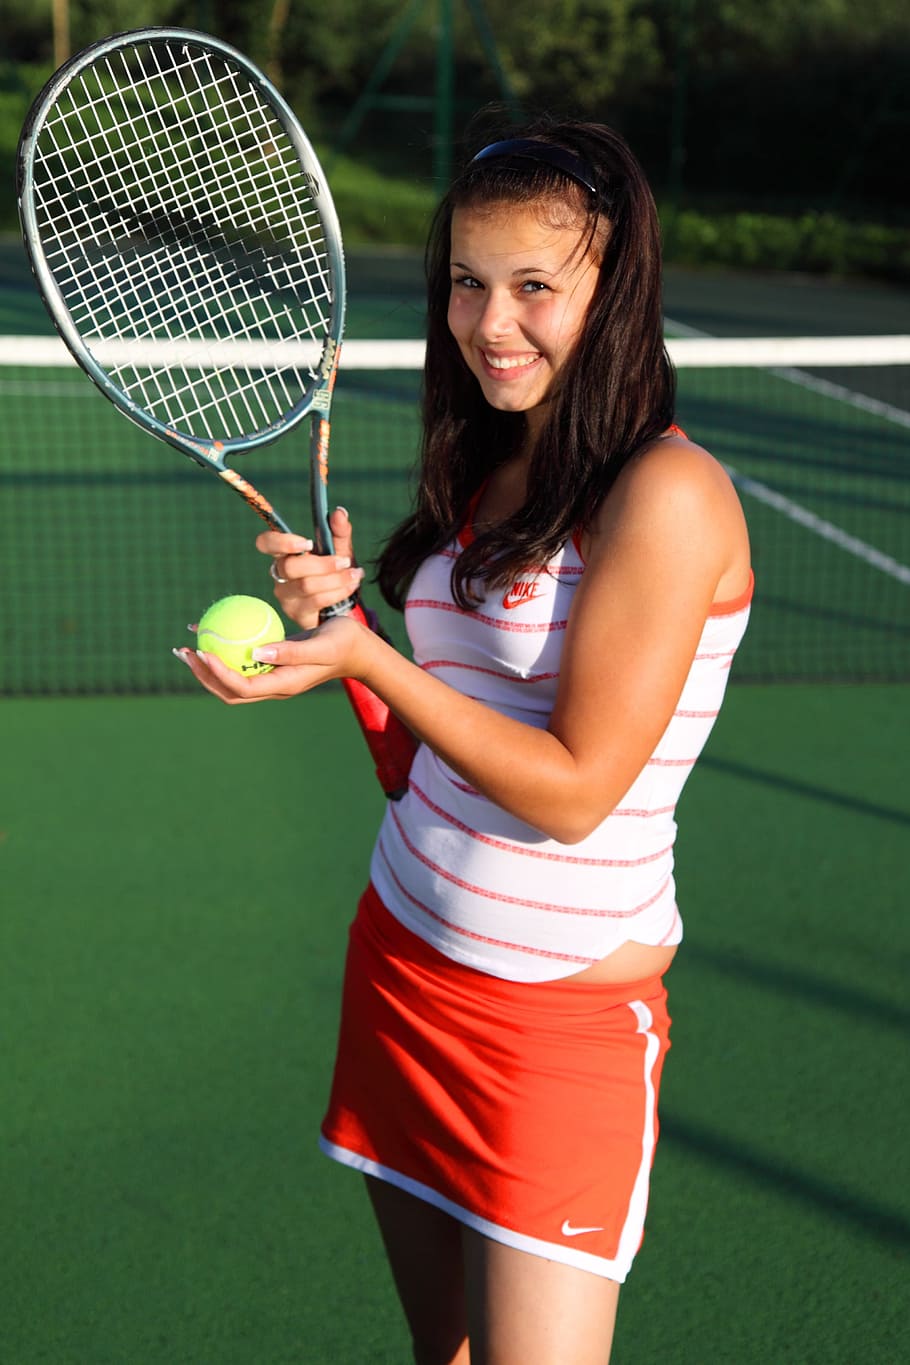 woman, holding, tennis racket, ball, field, Active, Ball, Court, Exercise, Female, court